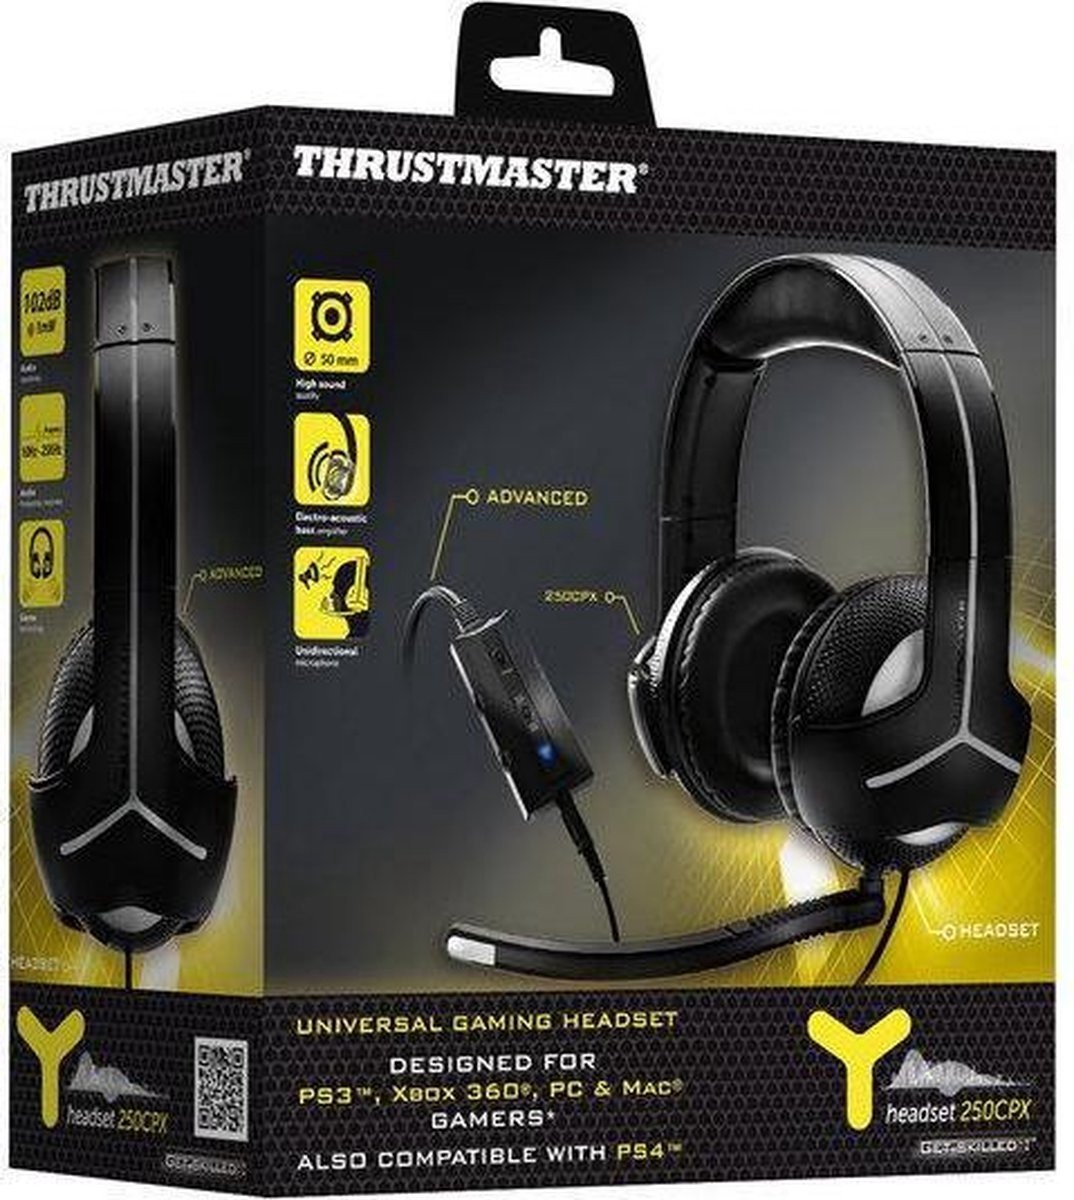 Thrustmaster Y250CPX Gaming Headset PC + PS3 + Xbox 360 + PS4 + 3DS + PS Vita + Mobile